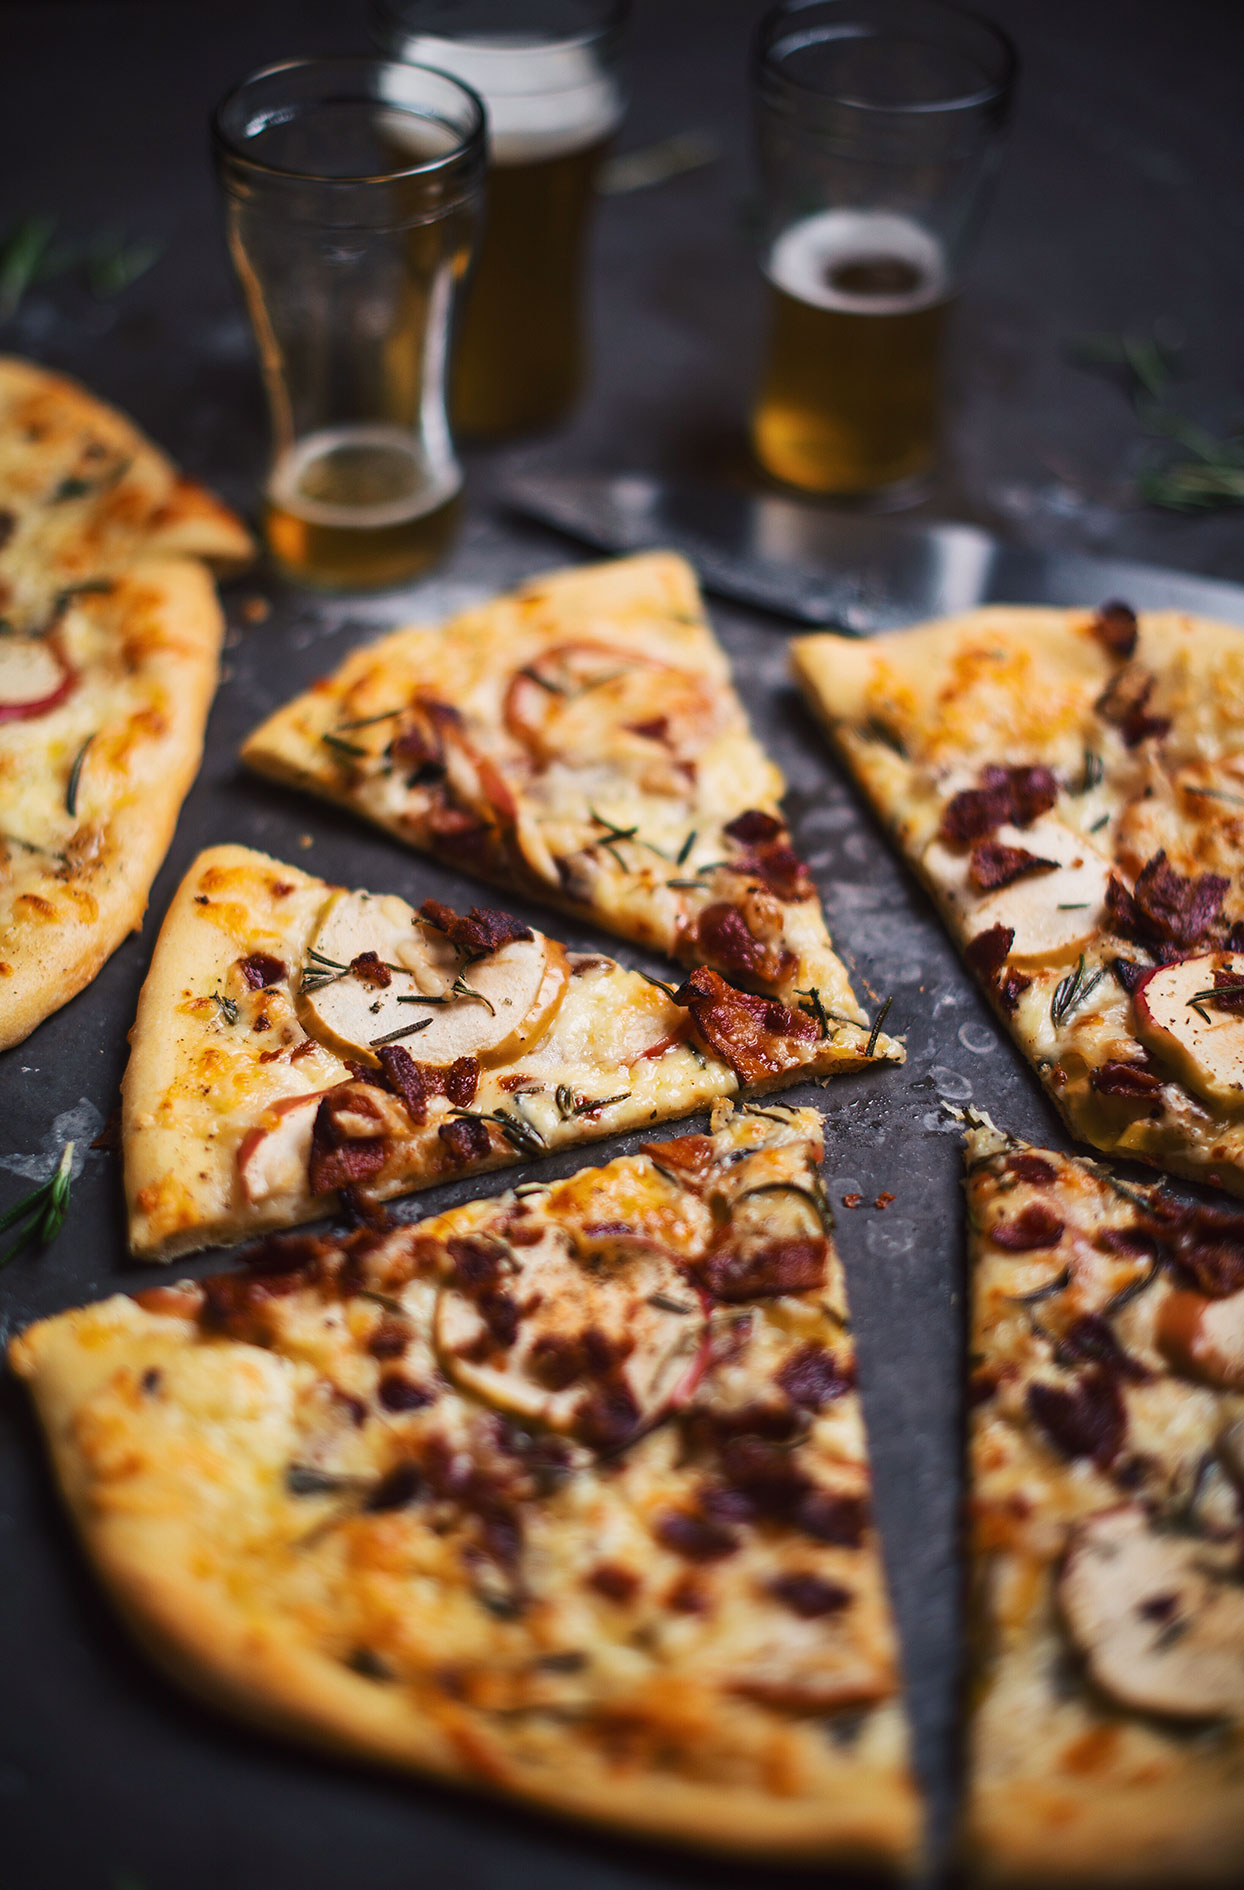 Apple pizza with smoked Gouda, maple bacon and rosemary